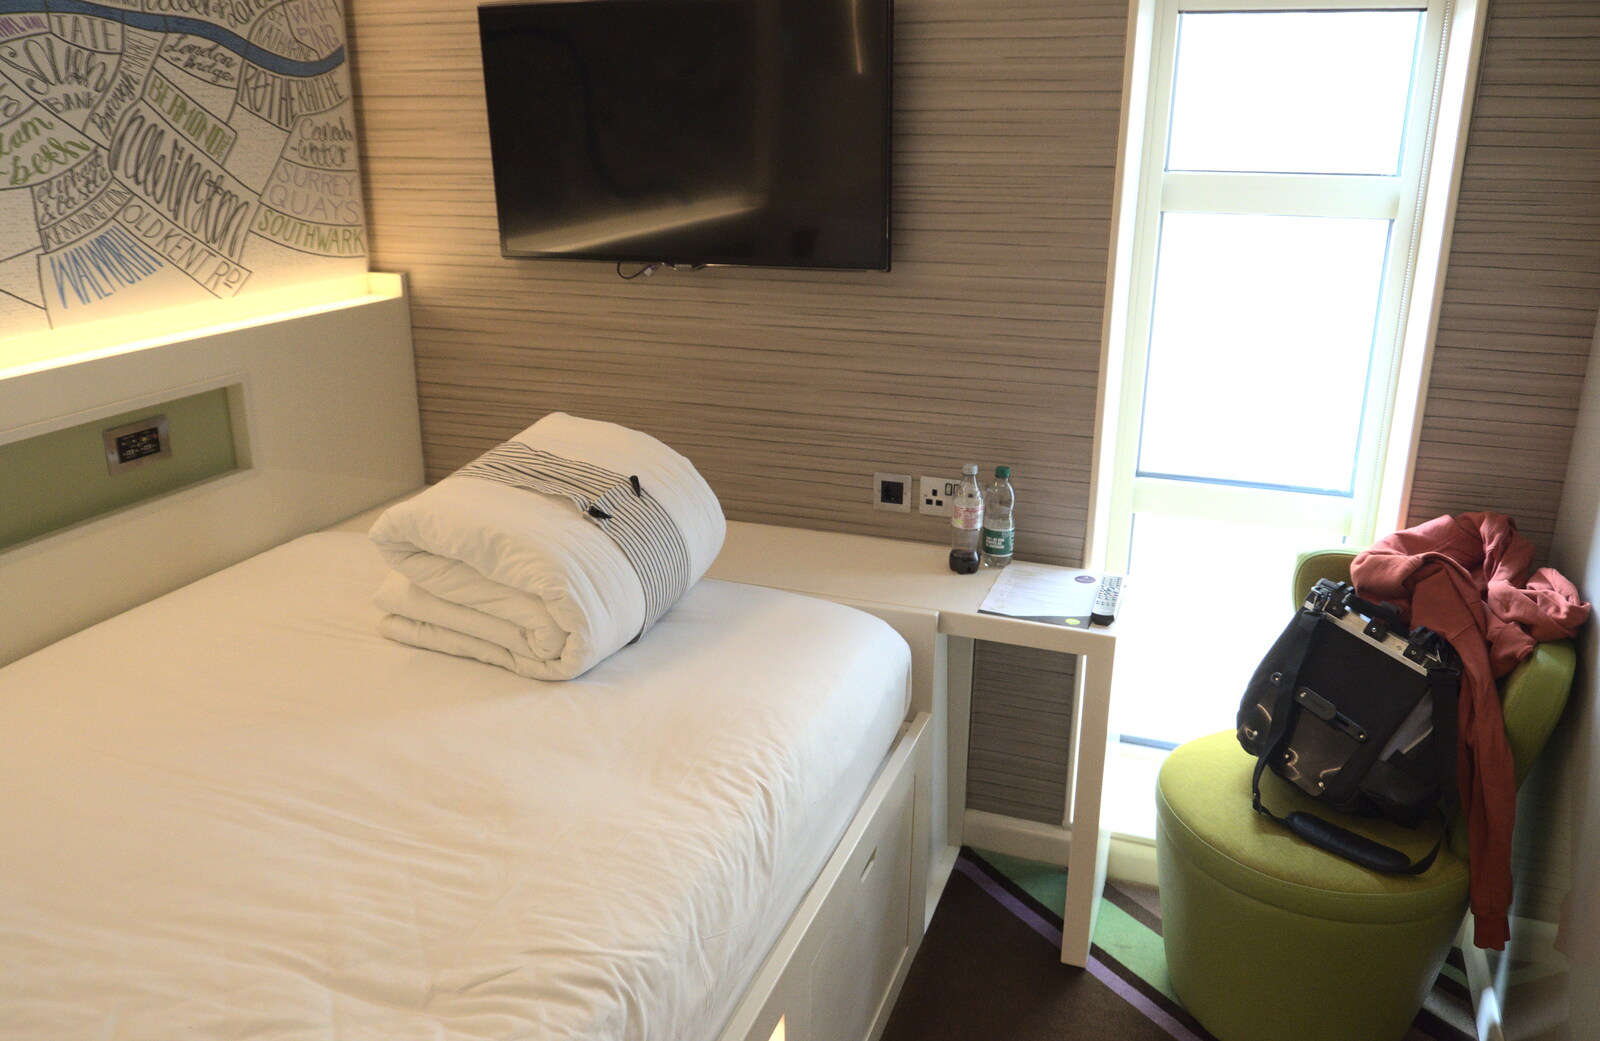 The Premier Inn Hub has tiny but well-done rooms from Genesis at the O2, North Greenwich, London - 24th March 2022